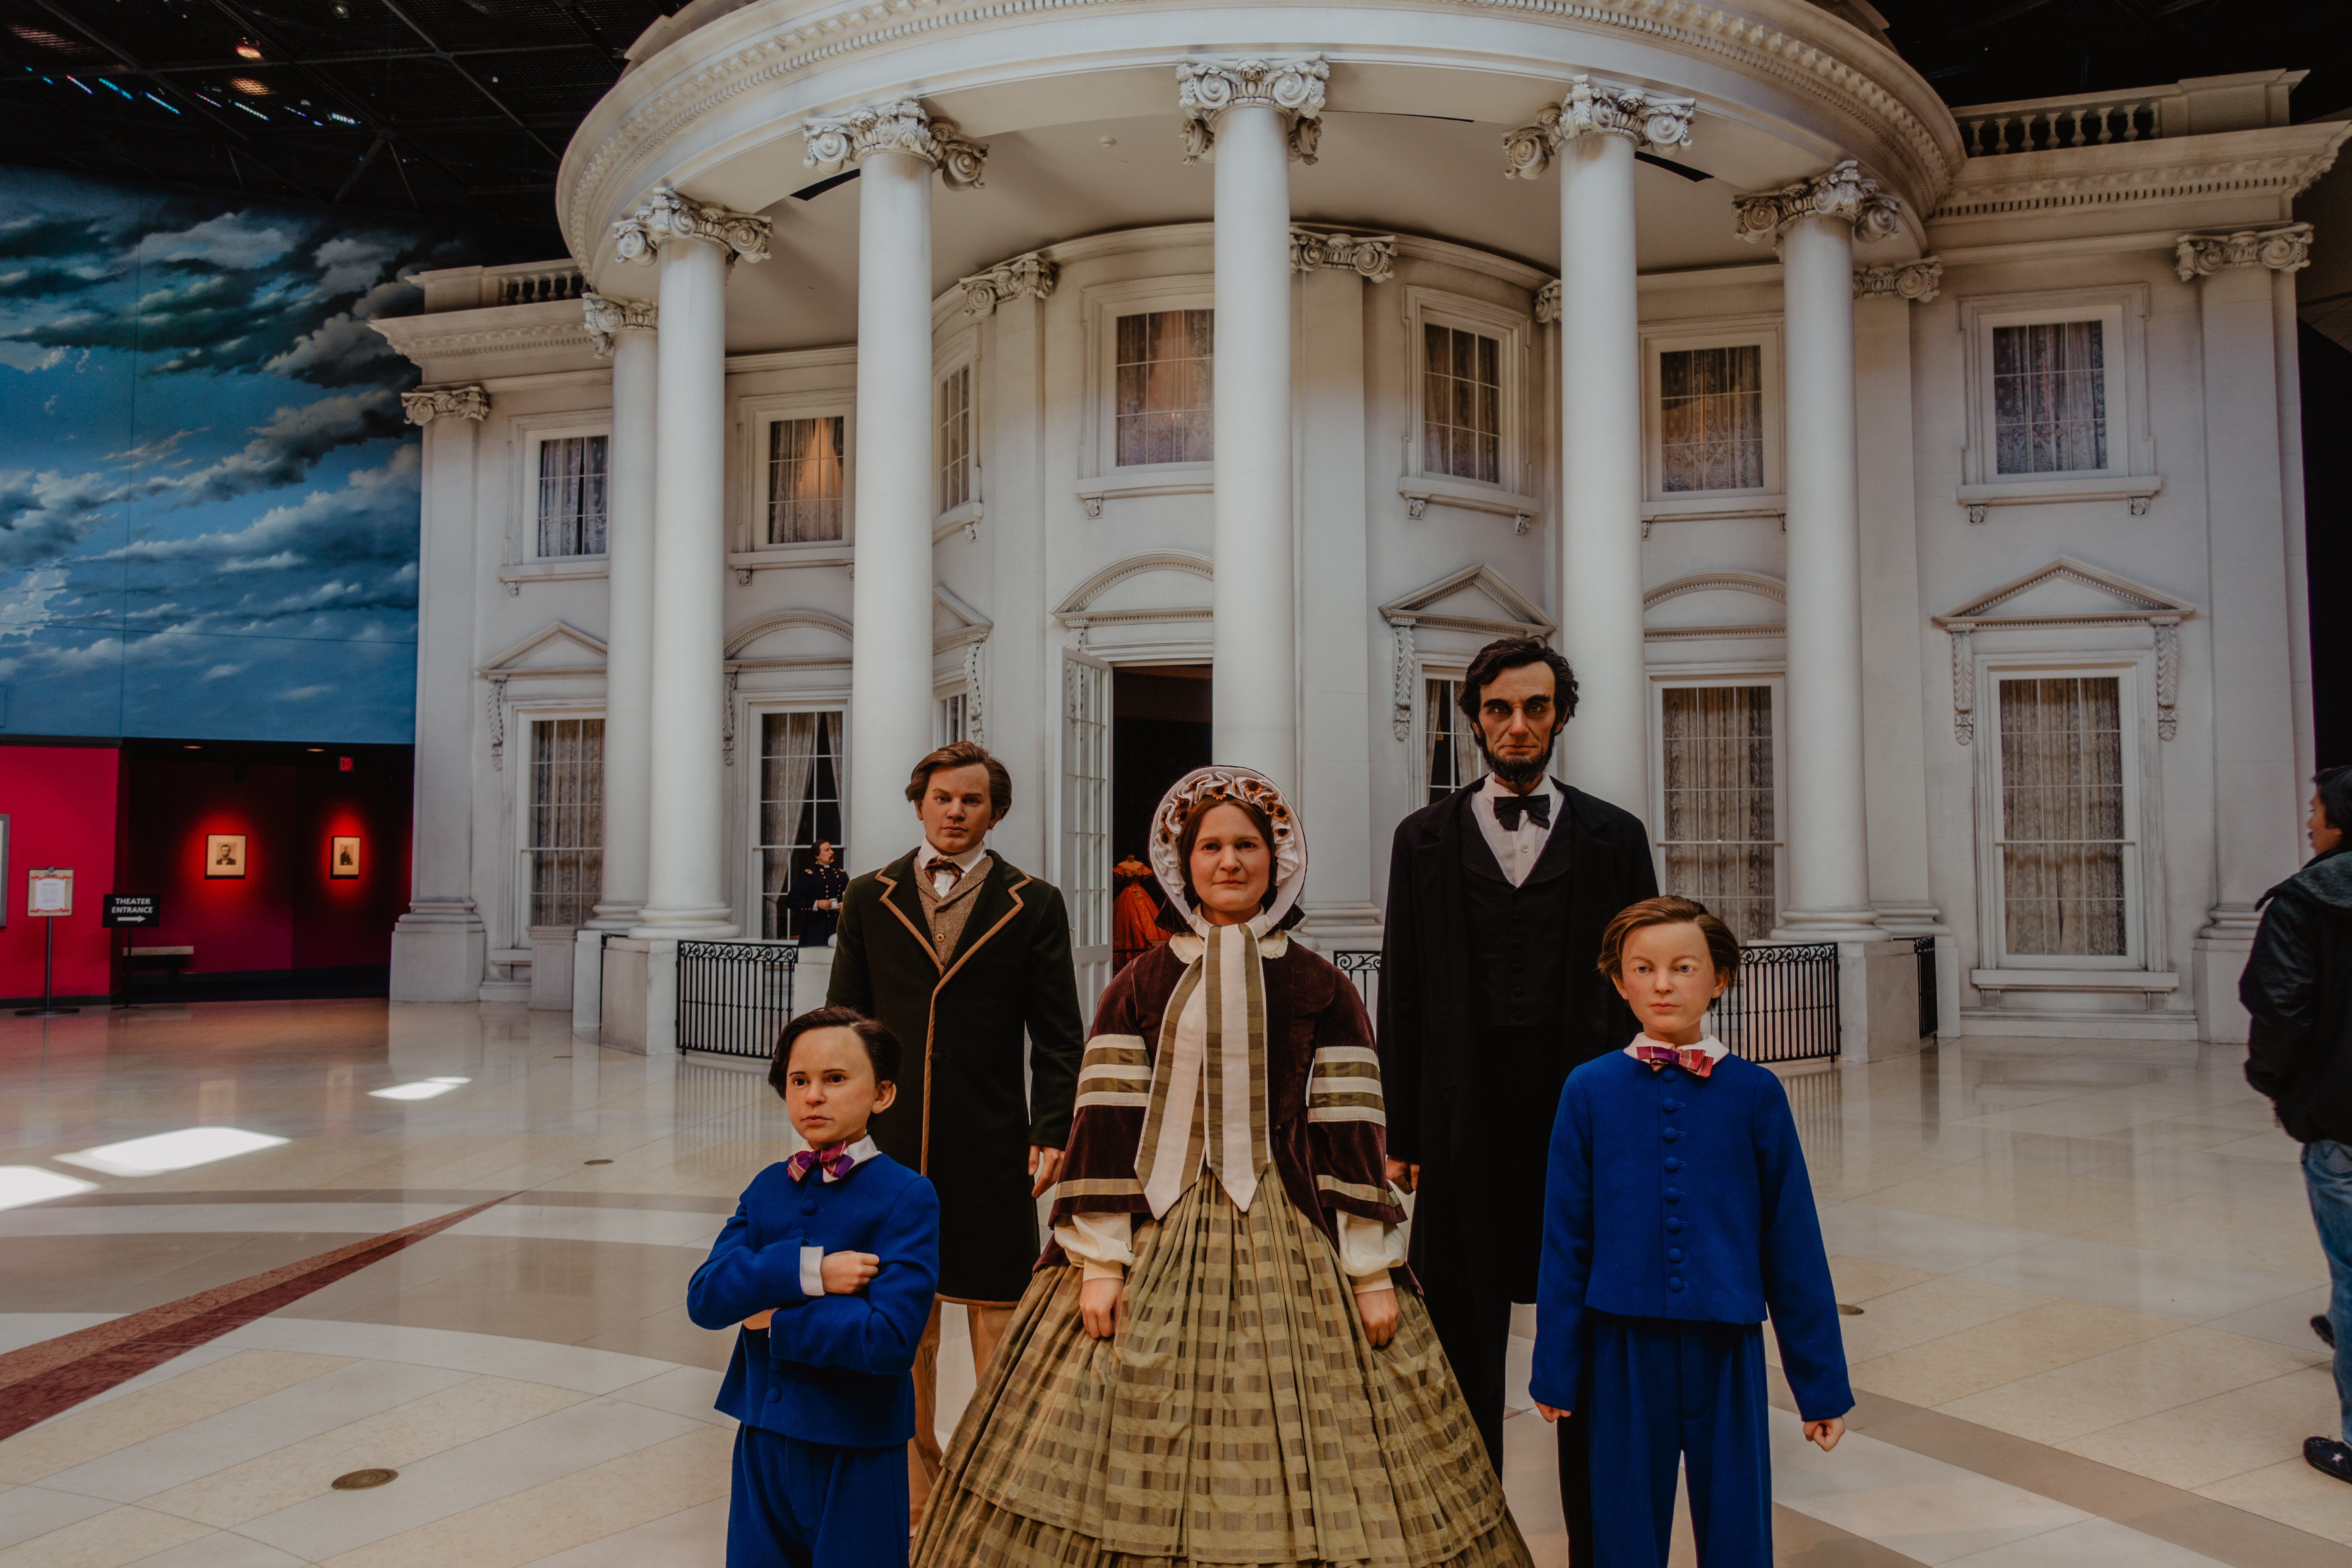 Abraham Lincoln, Mary Todd Lincoln, and their family at the Lincoln Presidential Library and Museum on your 1 day Springfield trip